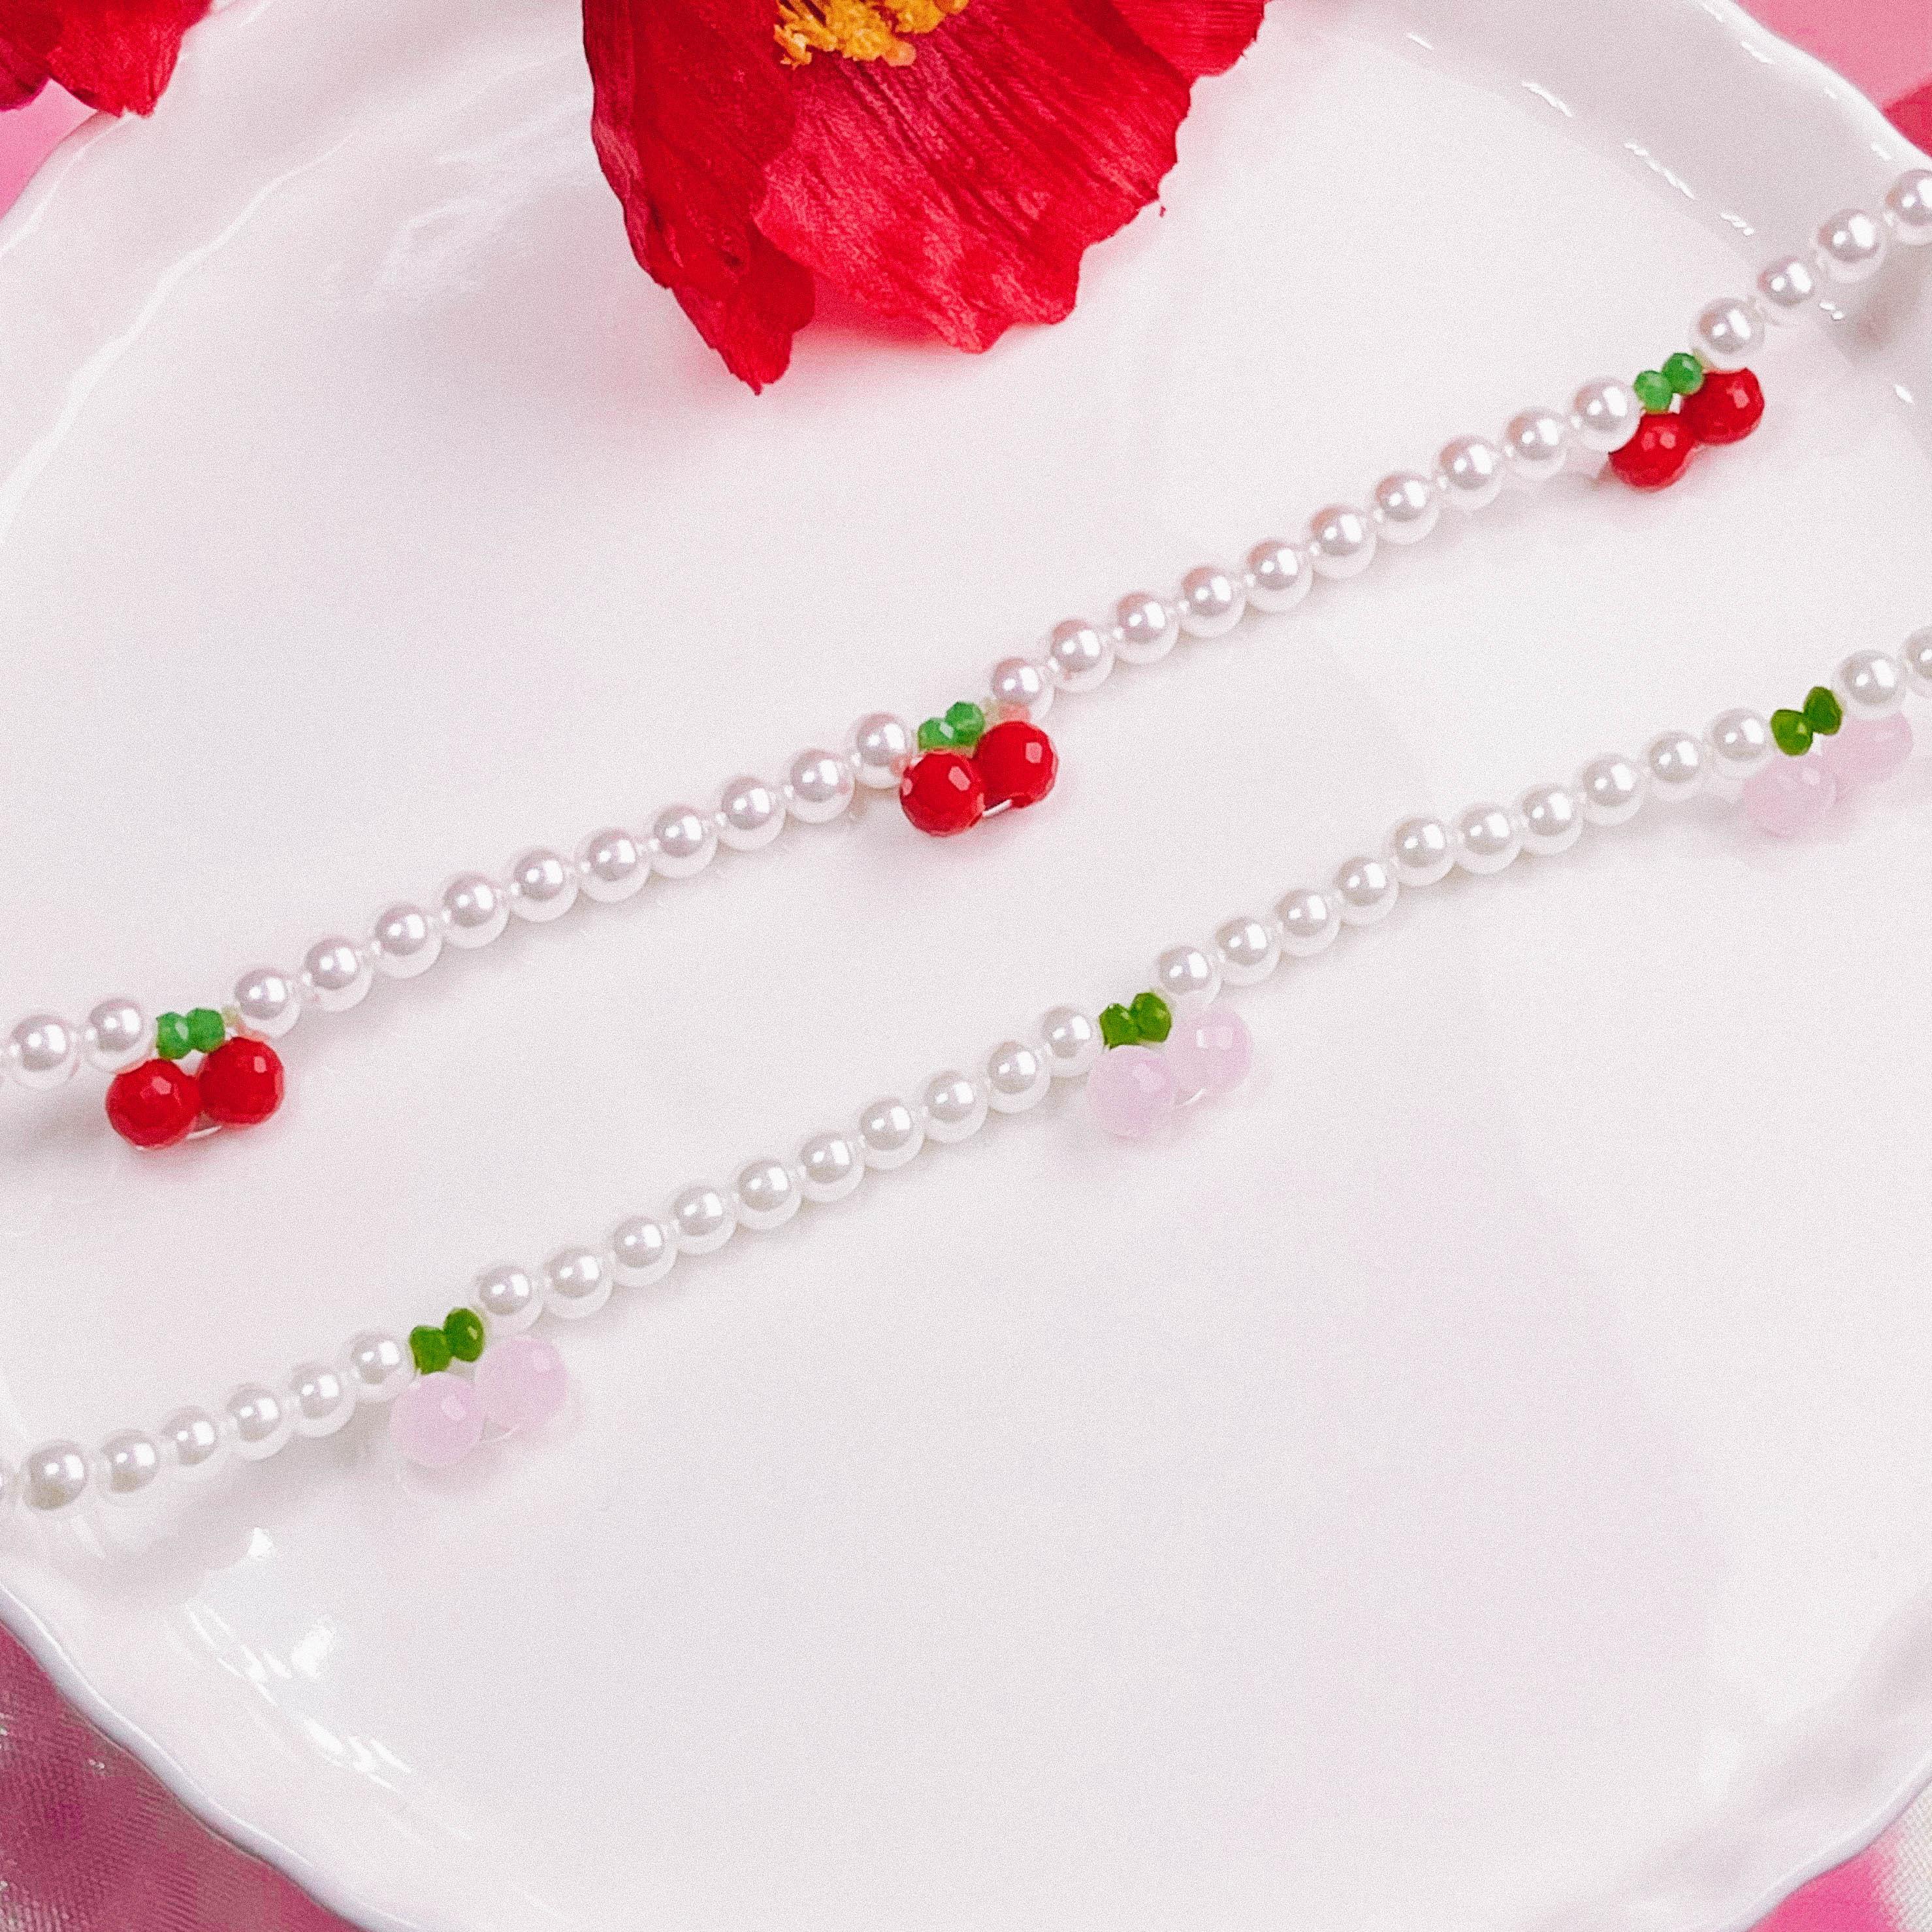 Sweet And Sour リング ネックレス necklace anything else 